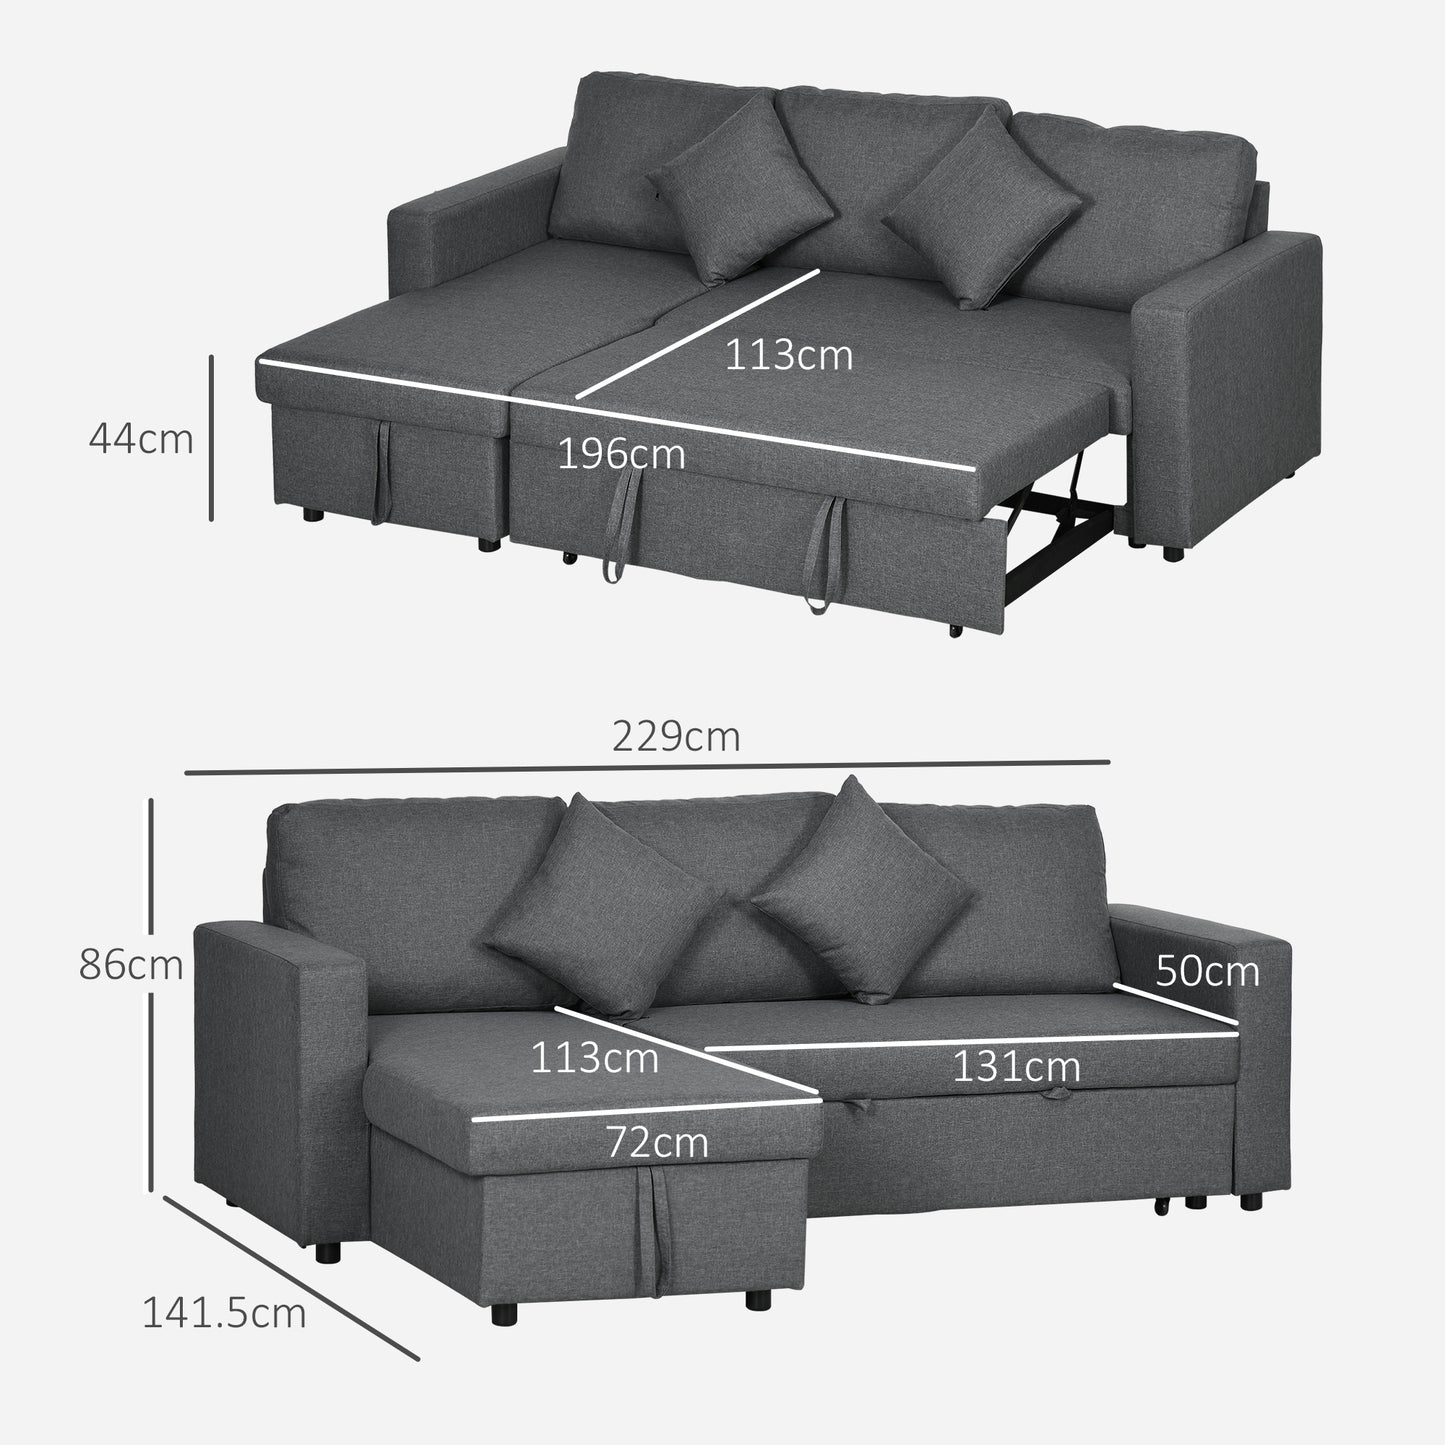 HOMCOM Corner Sofa Bed with Storage, 3 Seater Pull Out Sofa Bed, Convertible L Shape Sofa Couch with Reversible Chaise Lounge for Living Room, Dark Grey